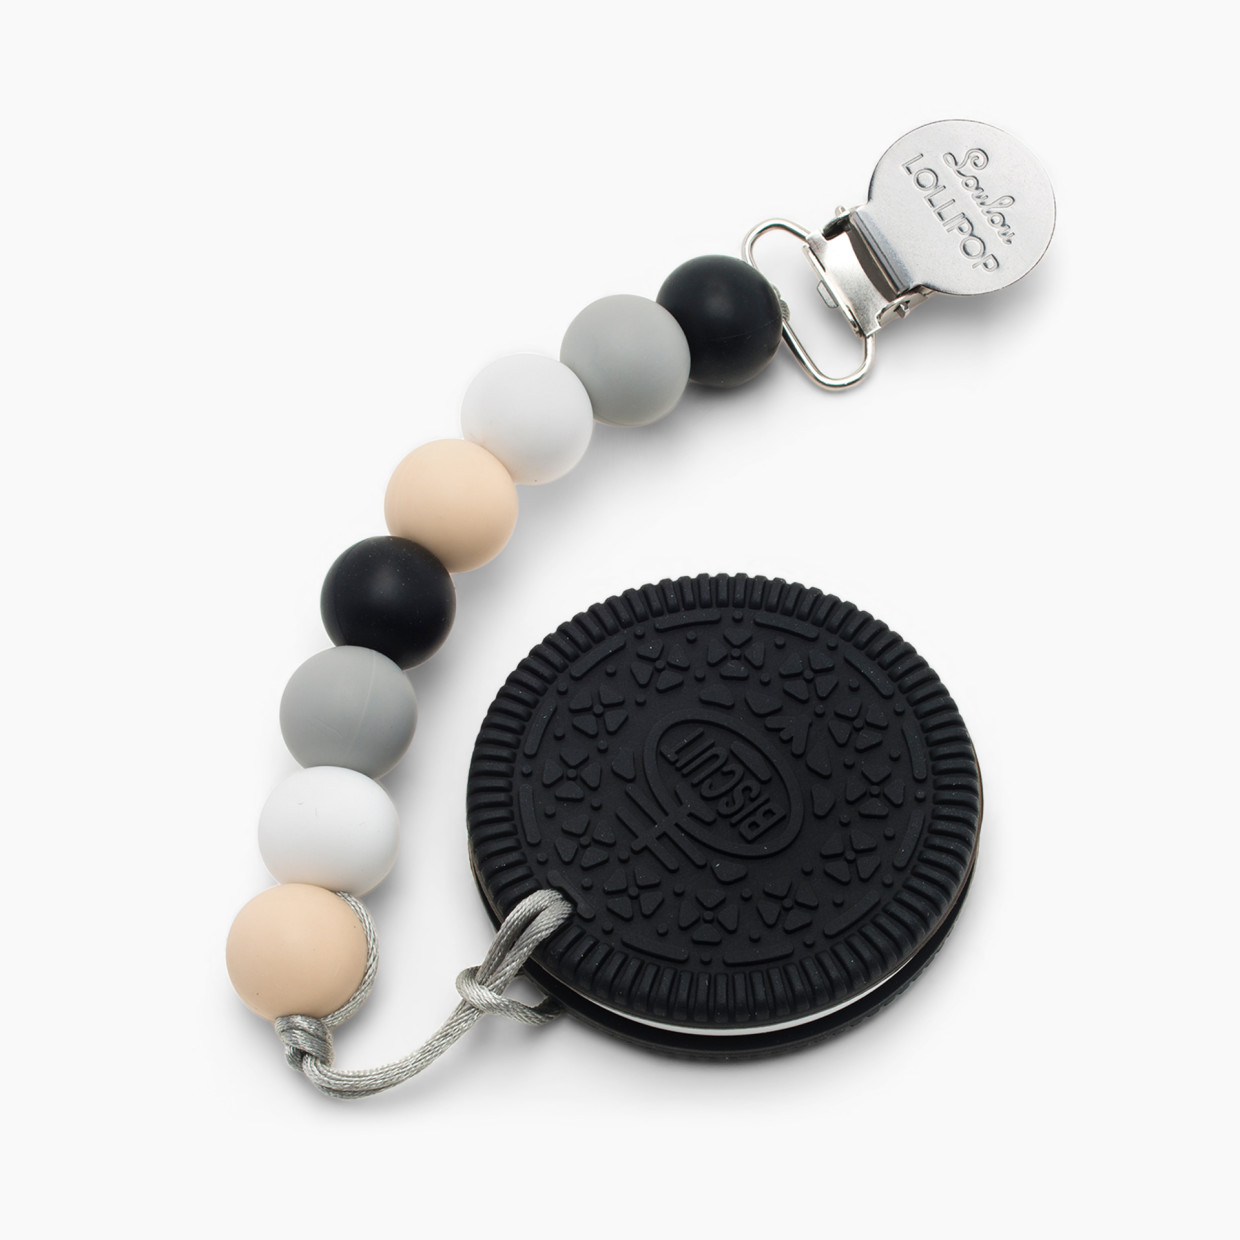 Loulou Lollipop Silicone Teether with Metal Clip - Chocolate Cookie (Black/Neutral).